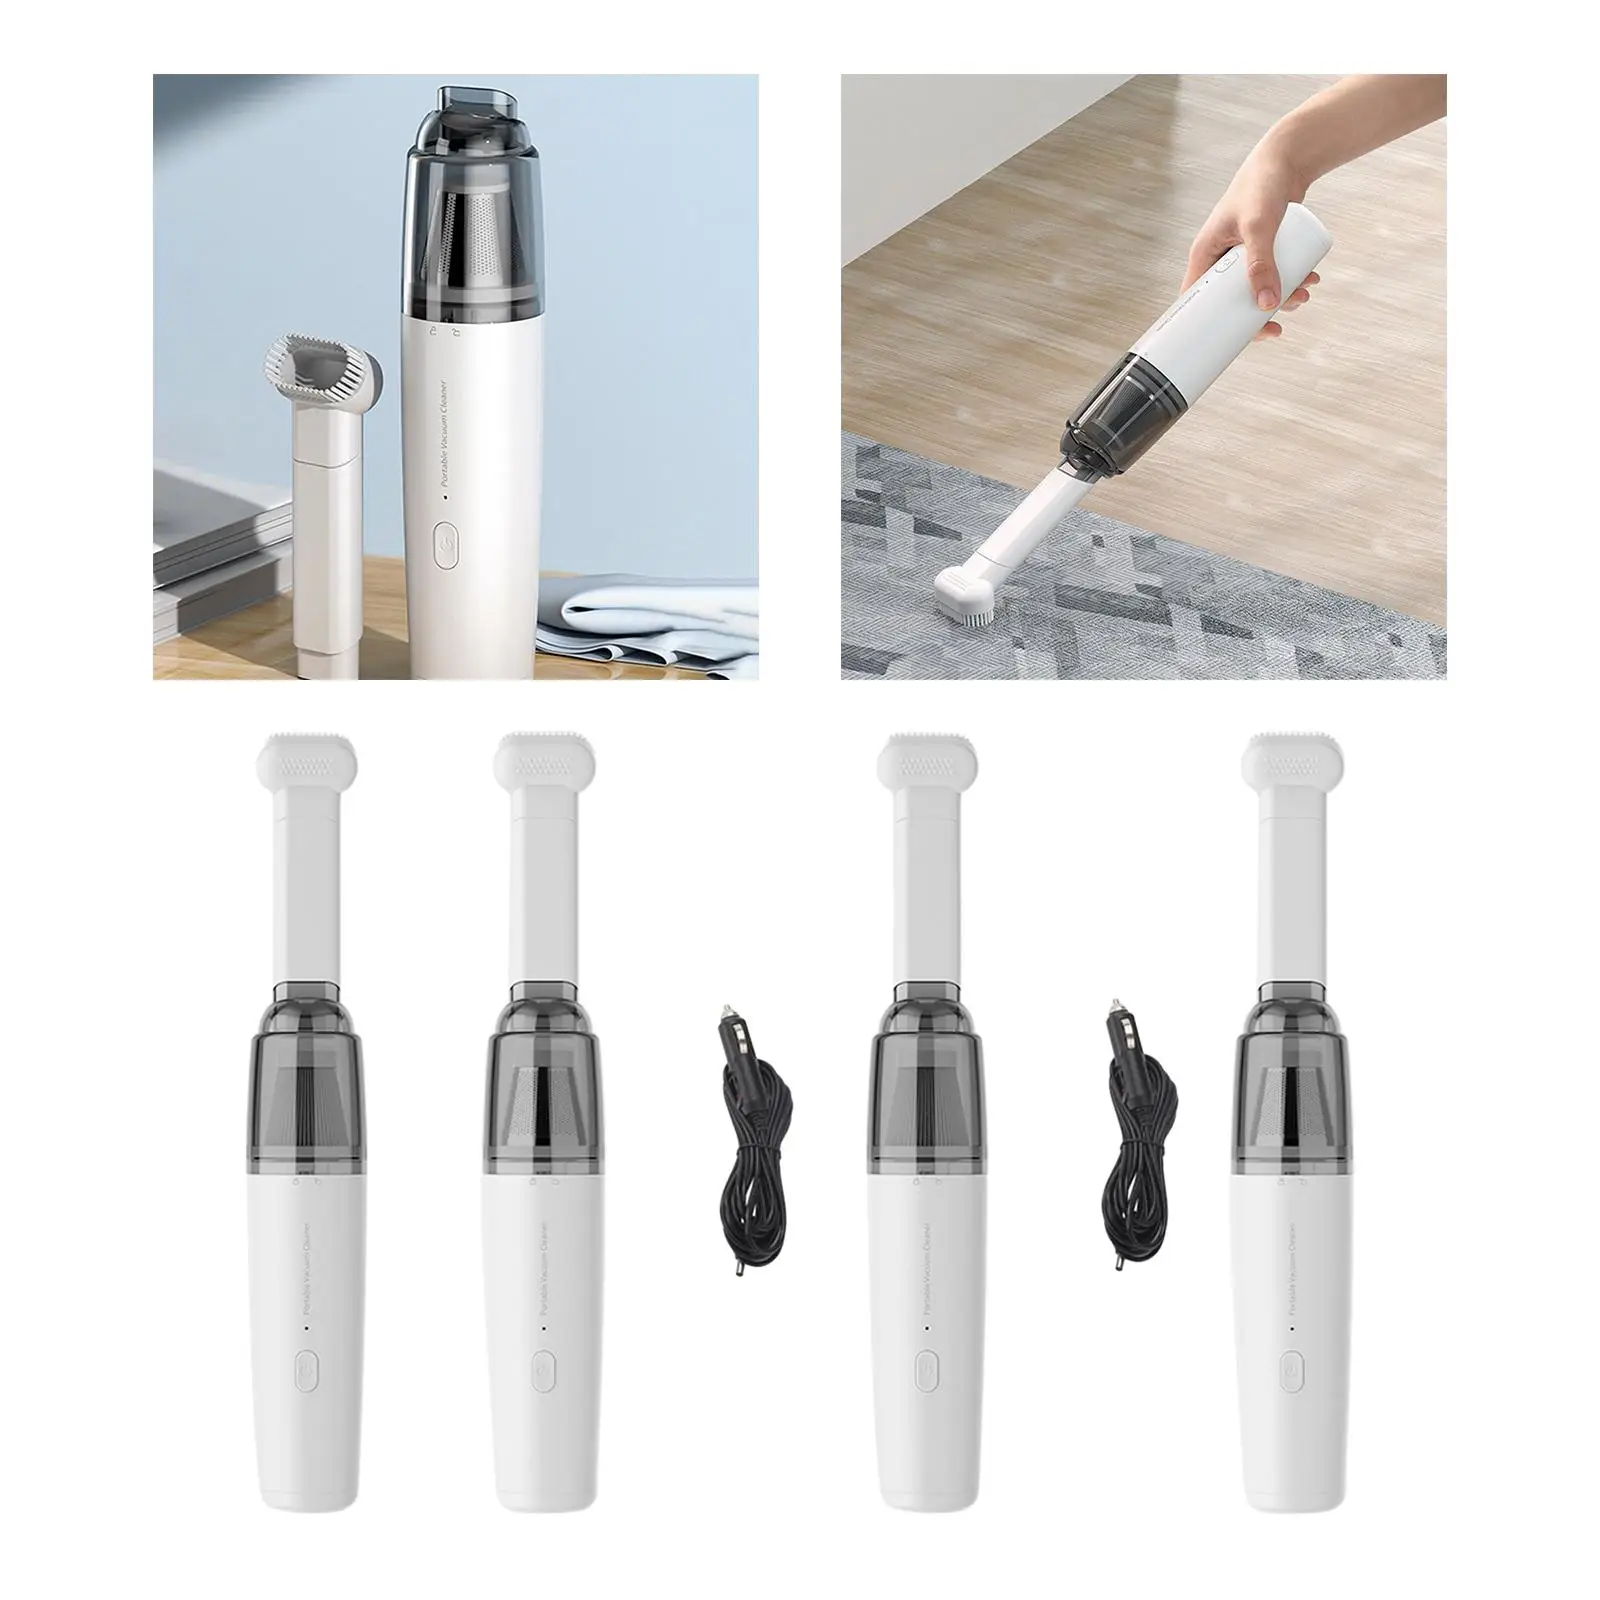 Portable Handheld Vacuum Cleaner 130ml Dust Bin Lightweight 13000PA Accessories Powerful Suction for